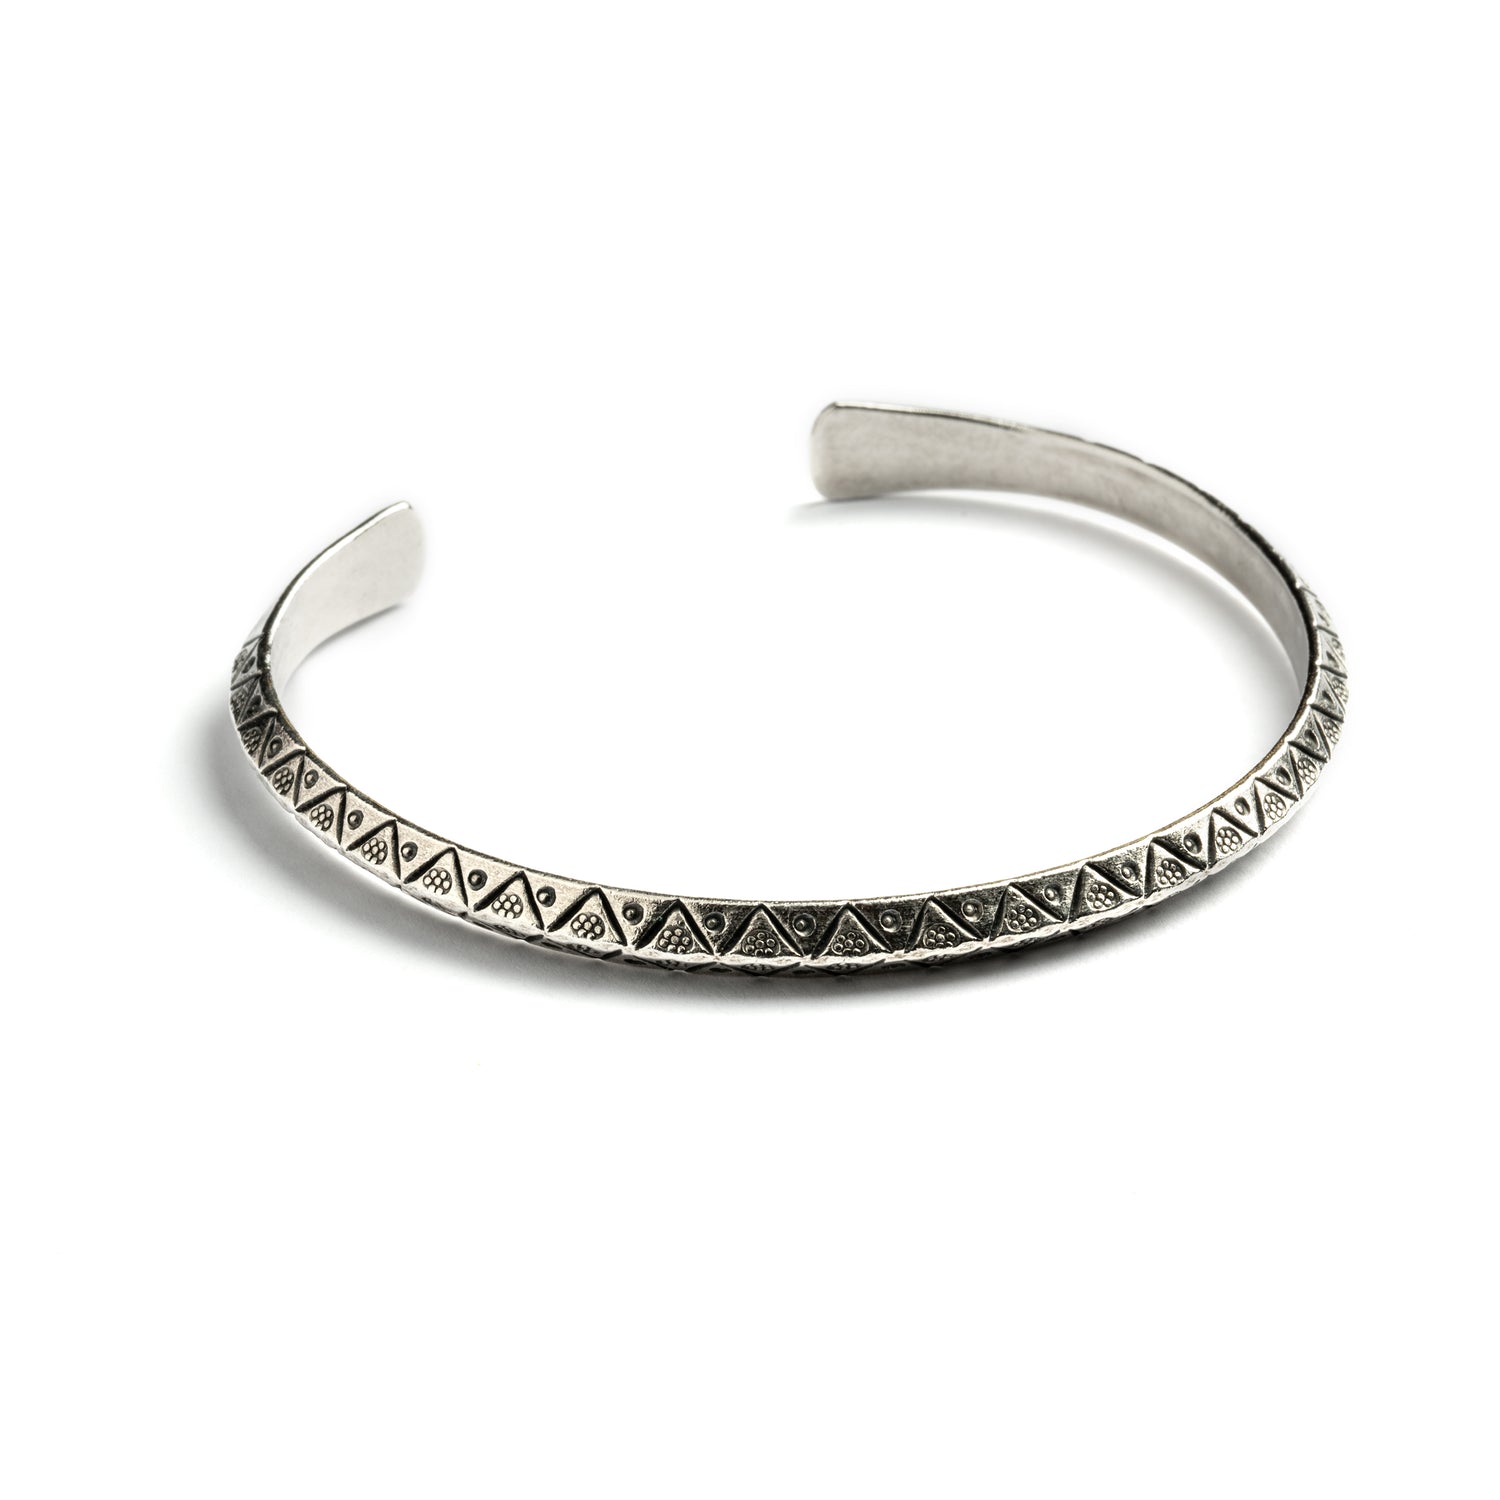 Noiga Tribal Silver Cuff left side view